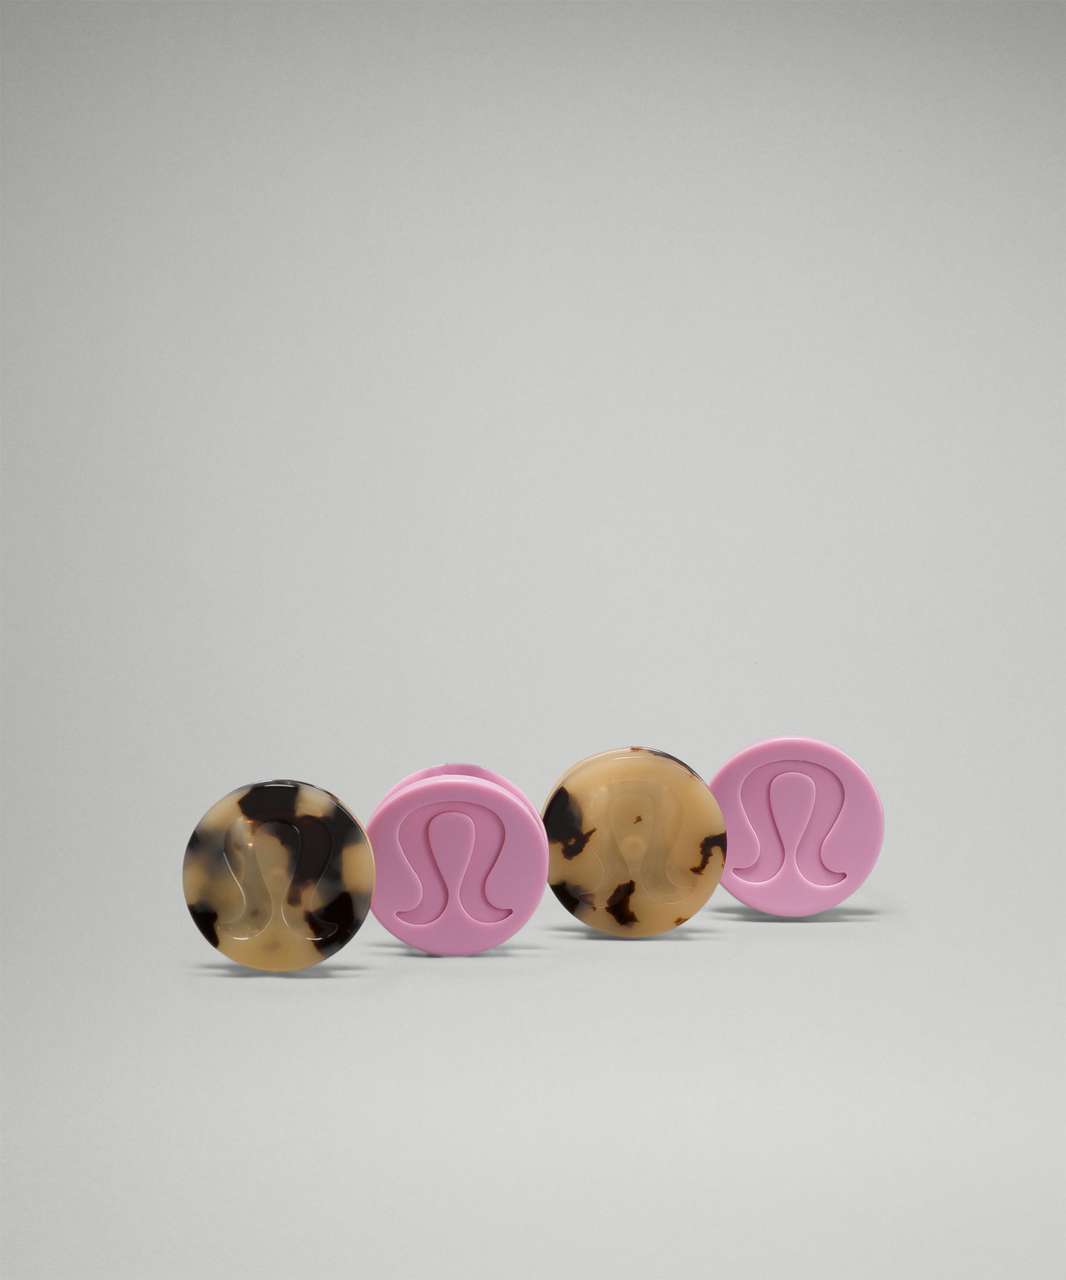 Lululemon Small Claw Hair Clips 4 Pack - Golden Sand / Black / Golden Sand / Black / Pink Peony / Pink Peony